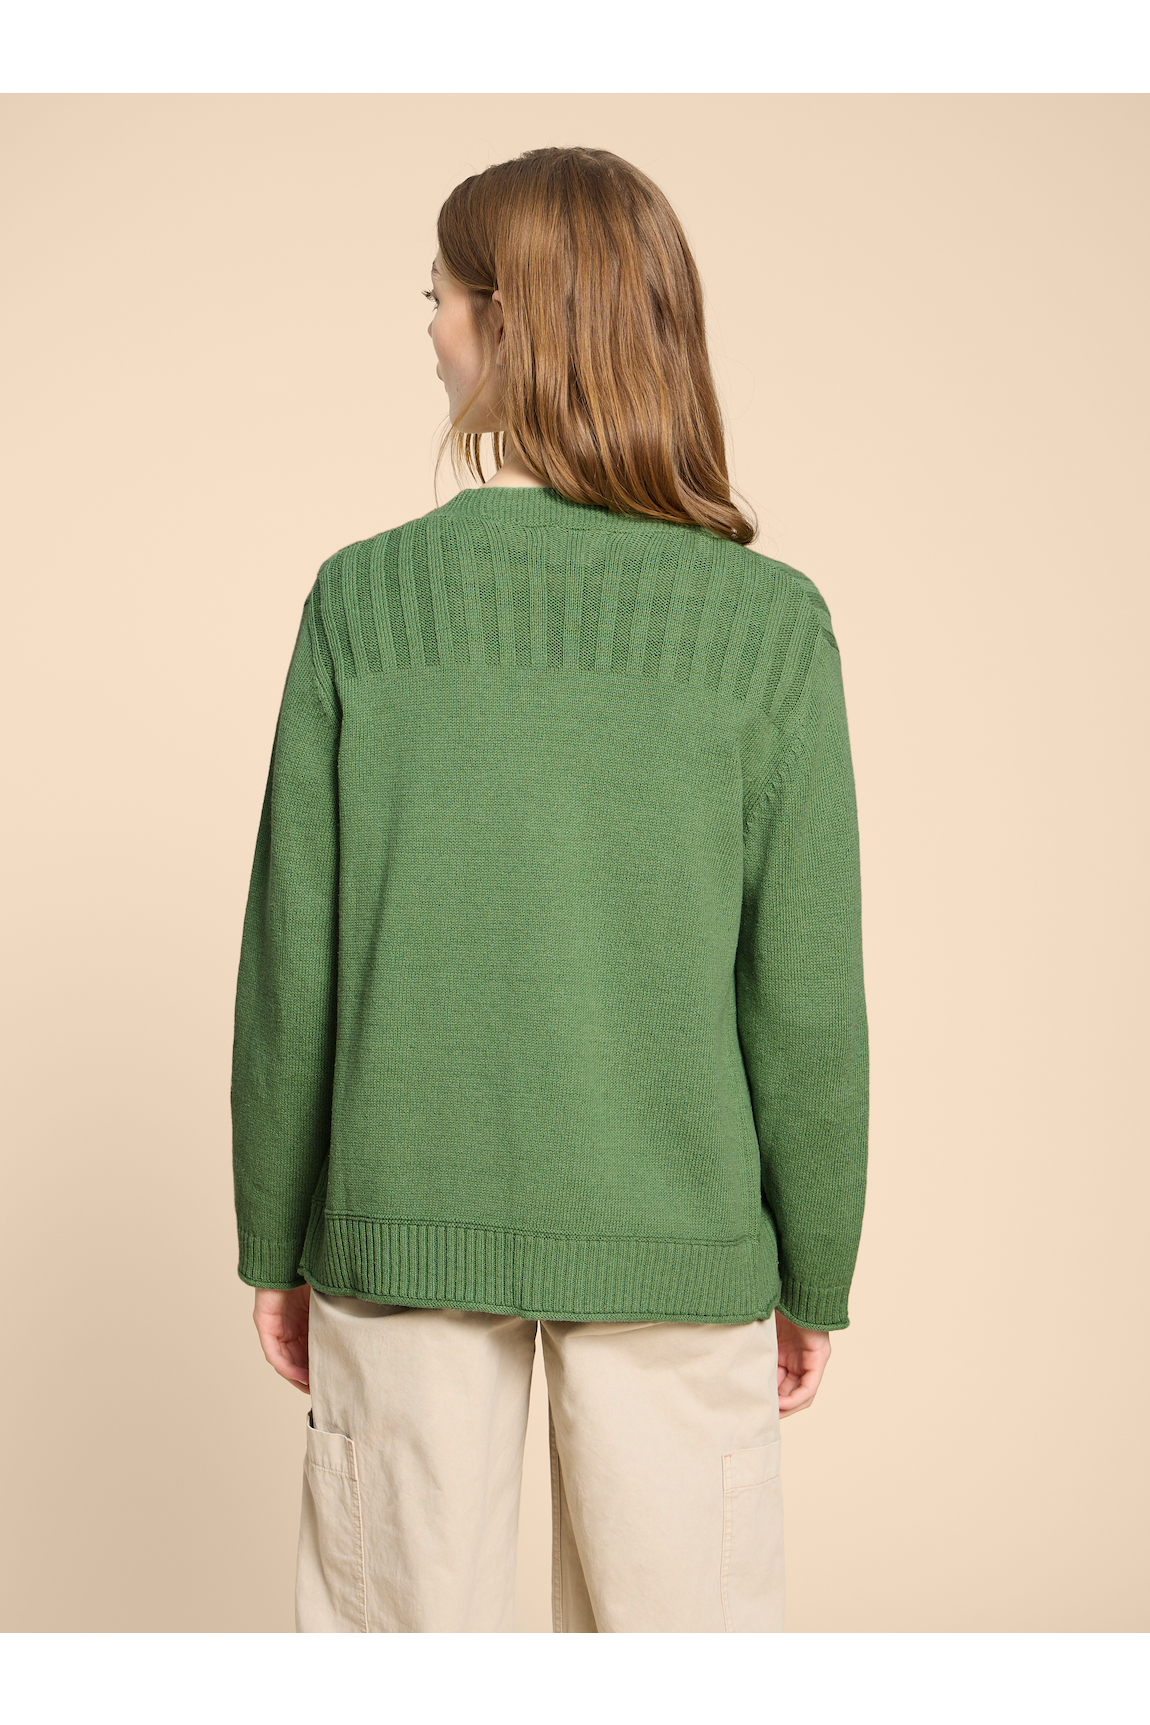 White Stuff Tula Cardi in Mid Green-Womens-Ohh! By Gum - Shop Sustainable